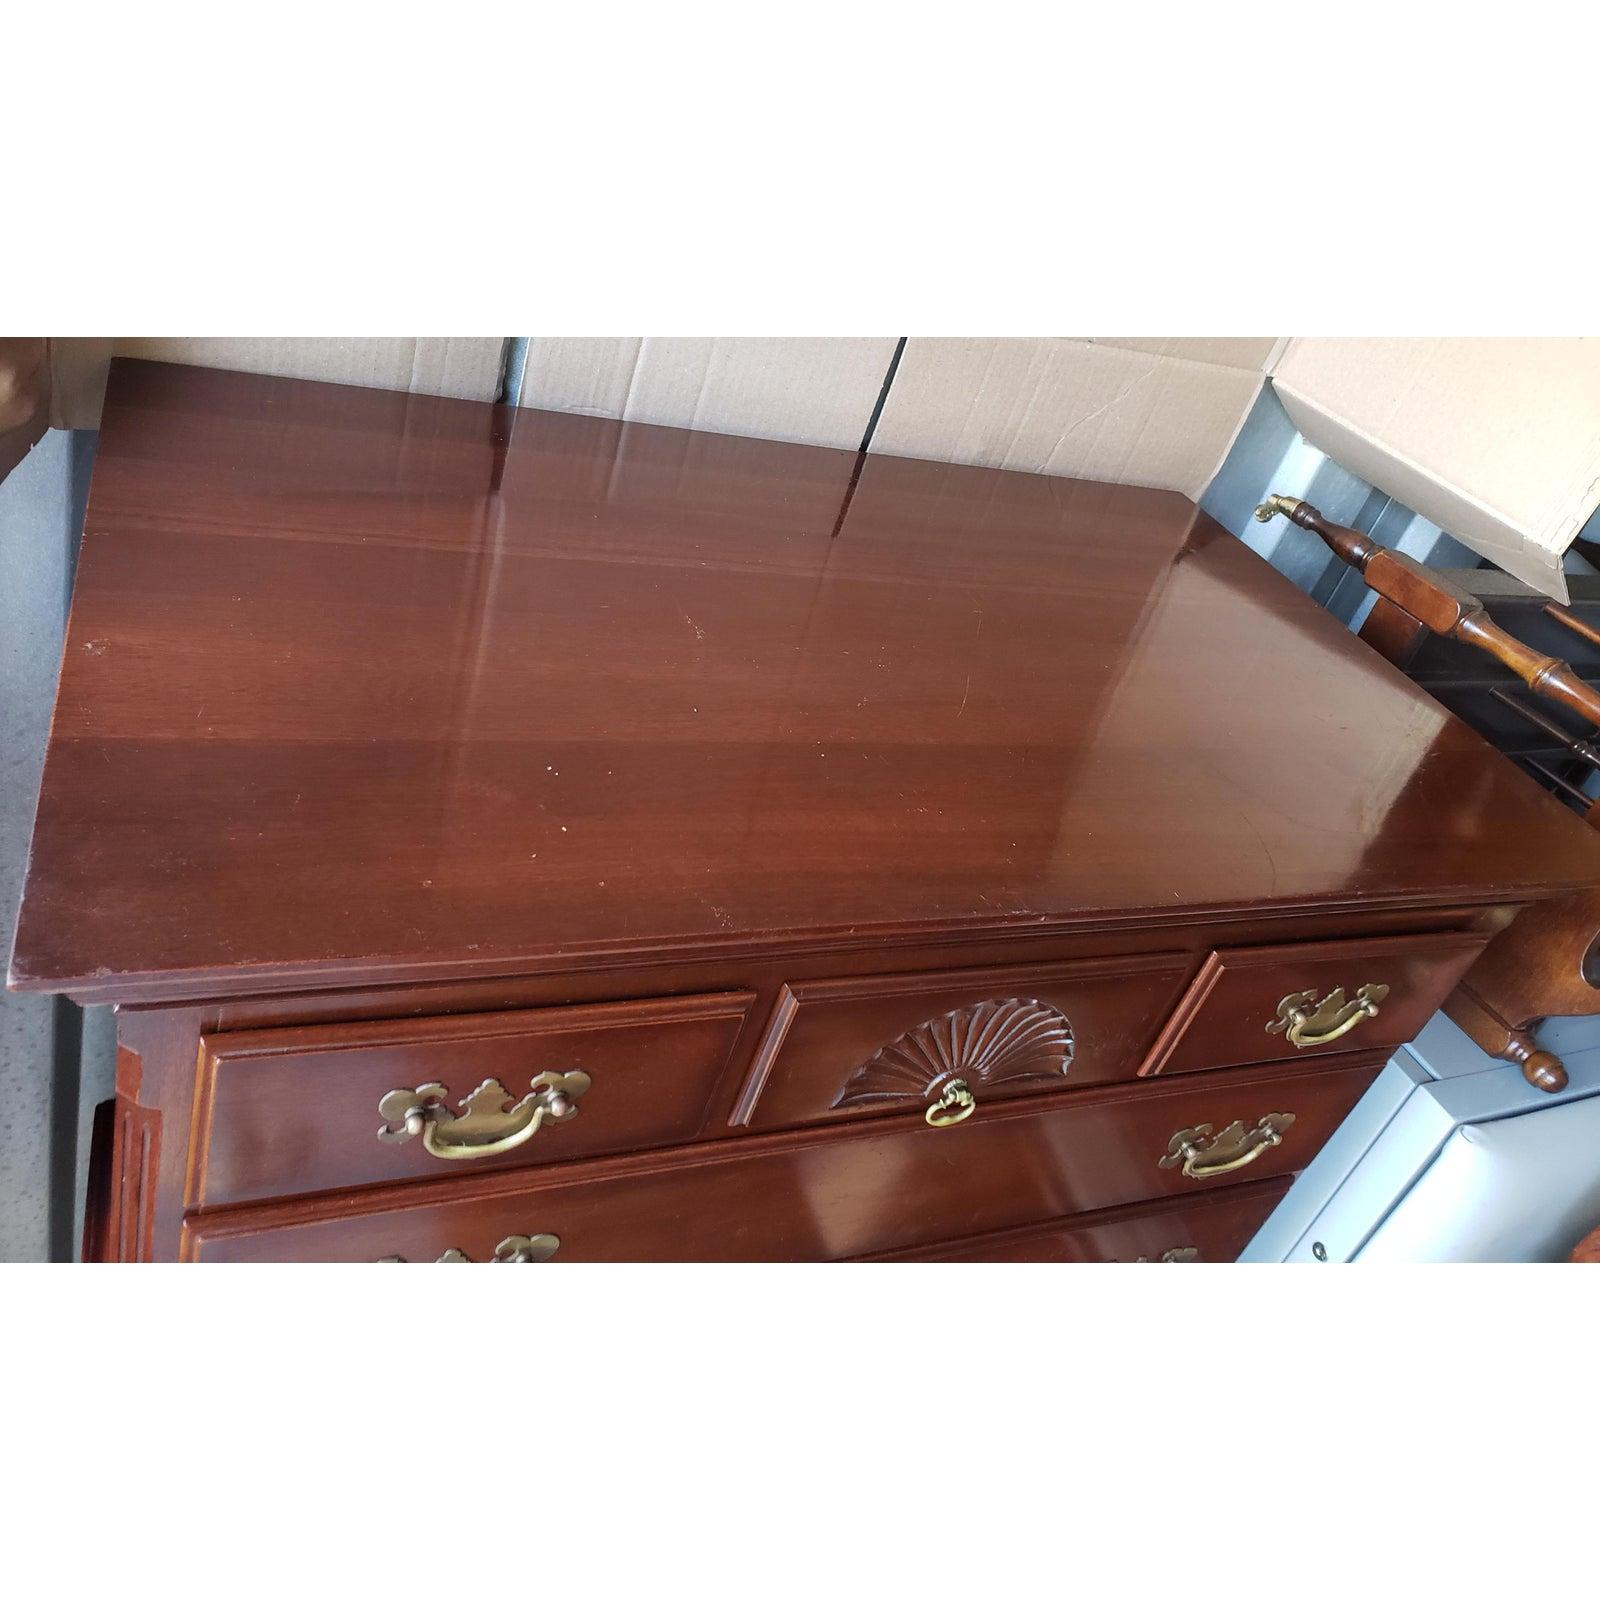 1960s Kling Furniture Certified Genuine Mahogany Chest on Chest of Drawers For Sale 1